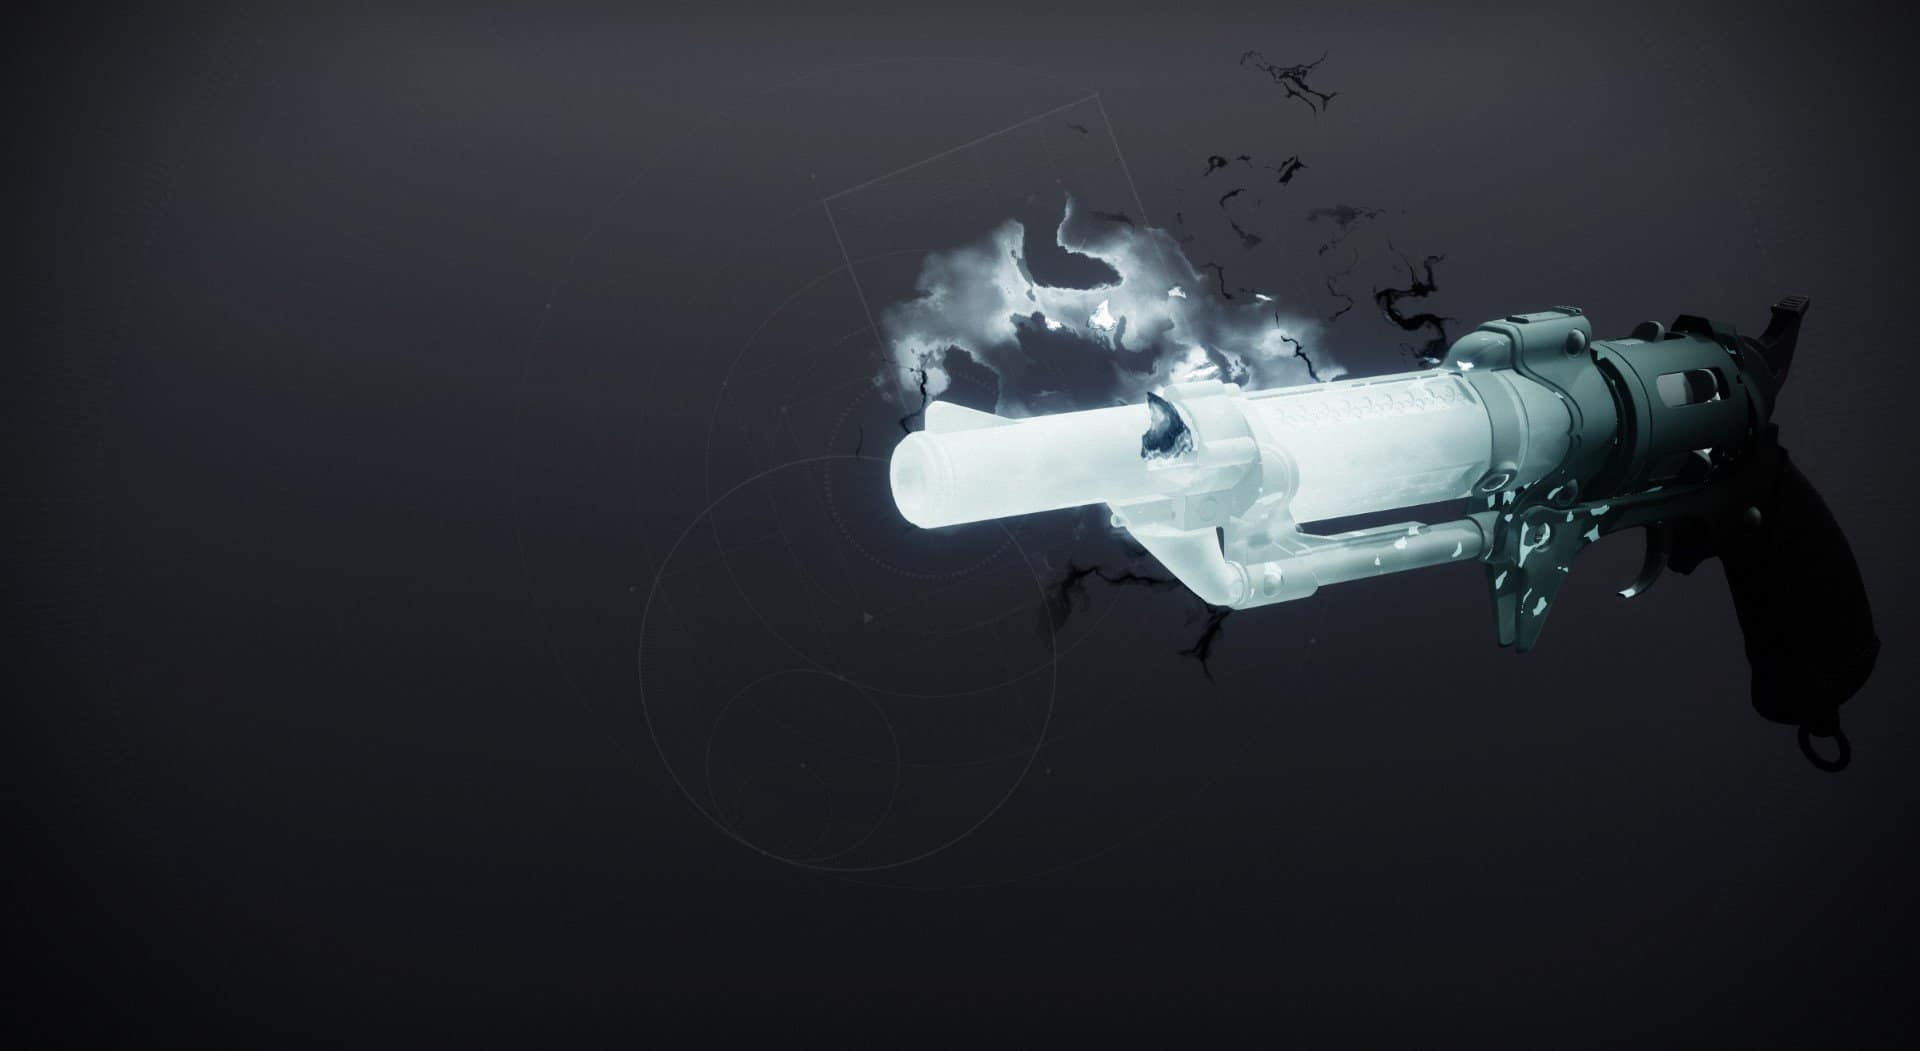 Targeted Redaction hand cannon